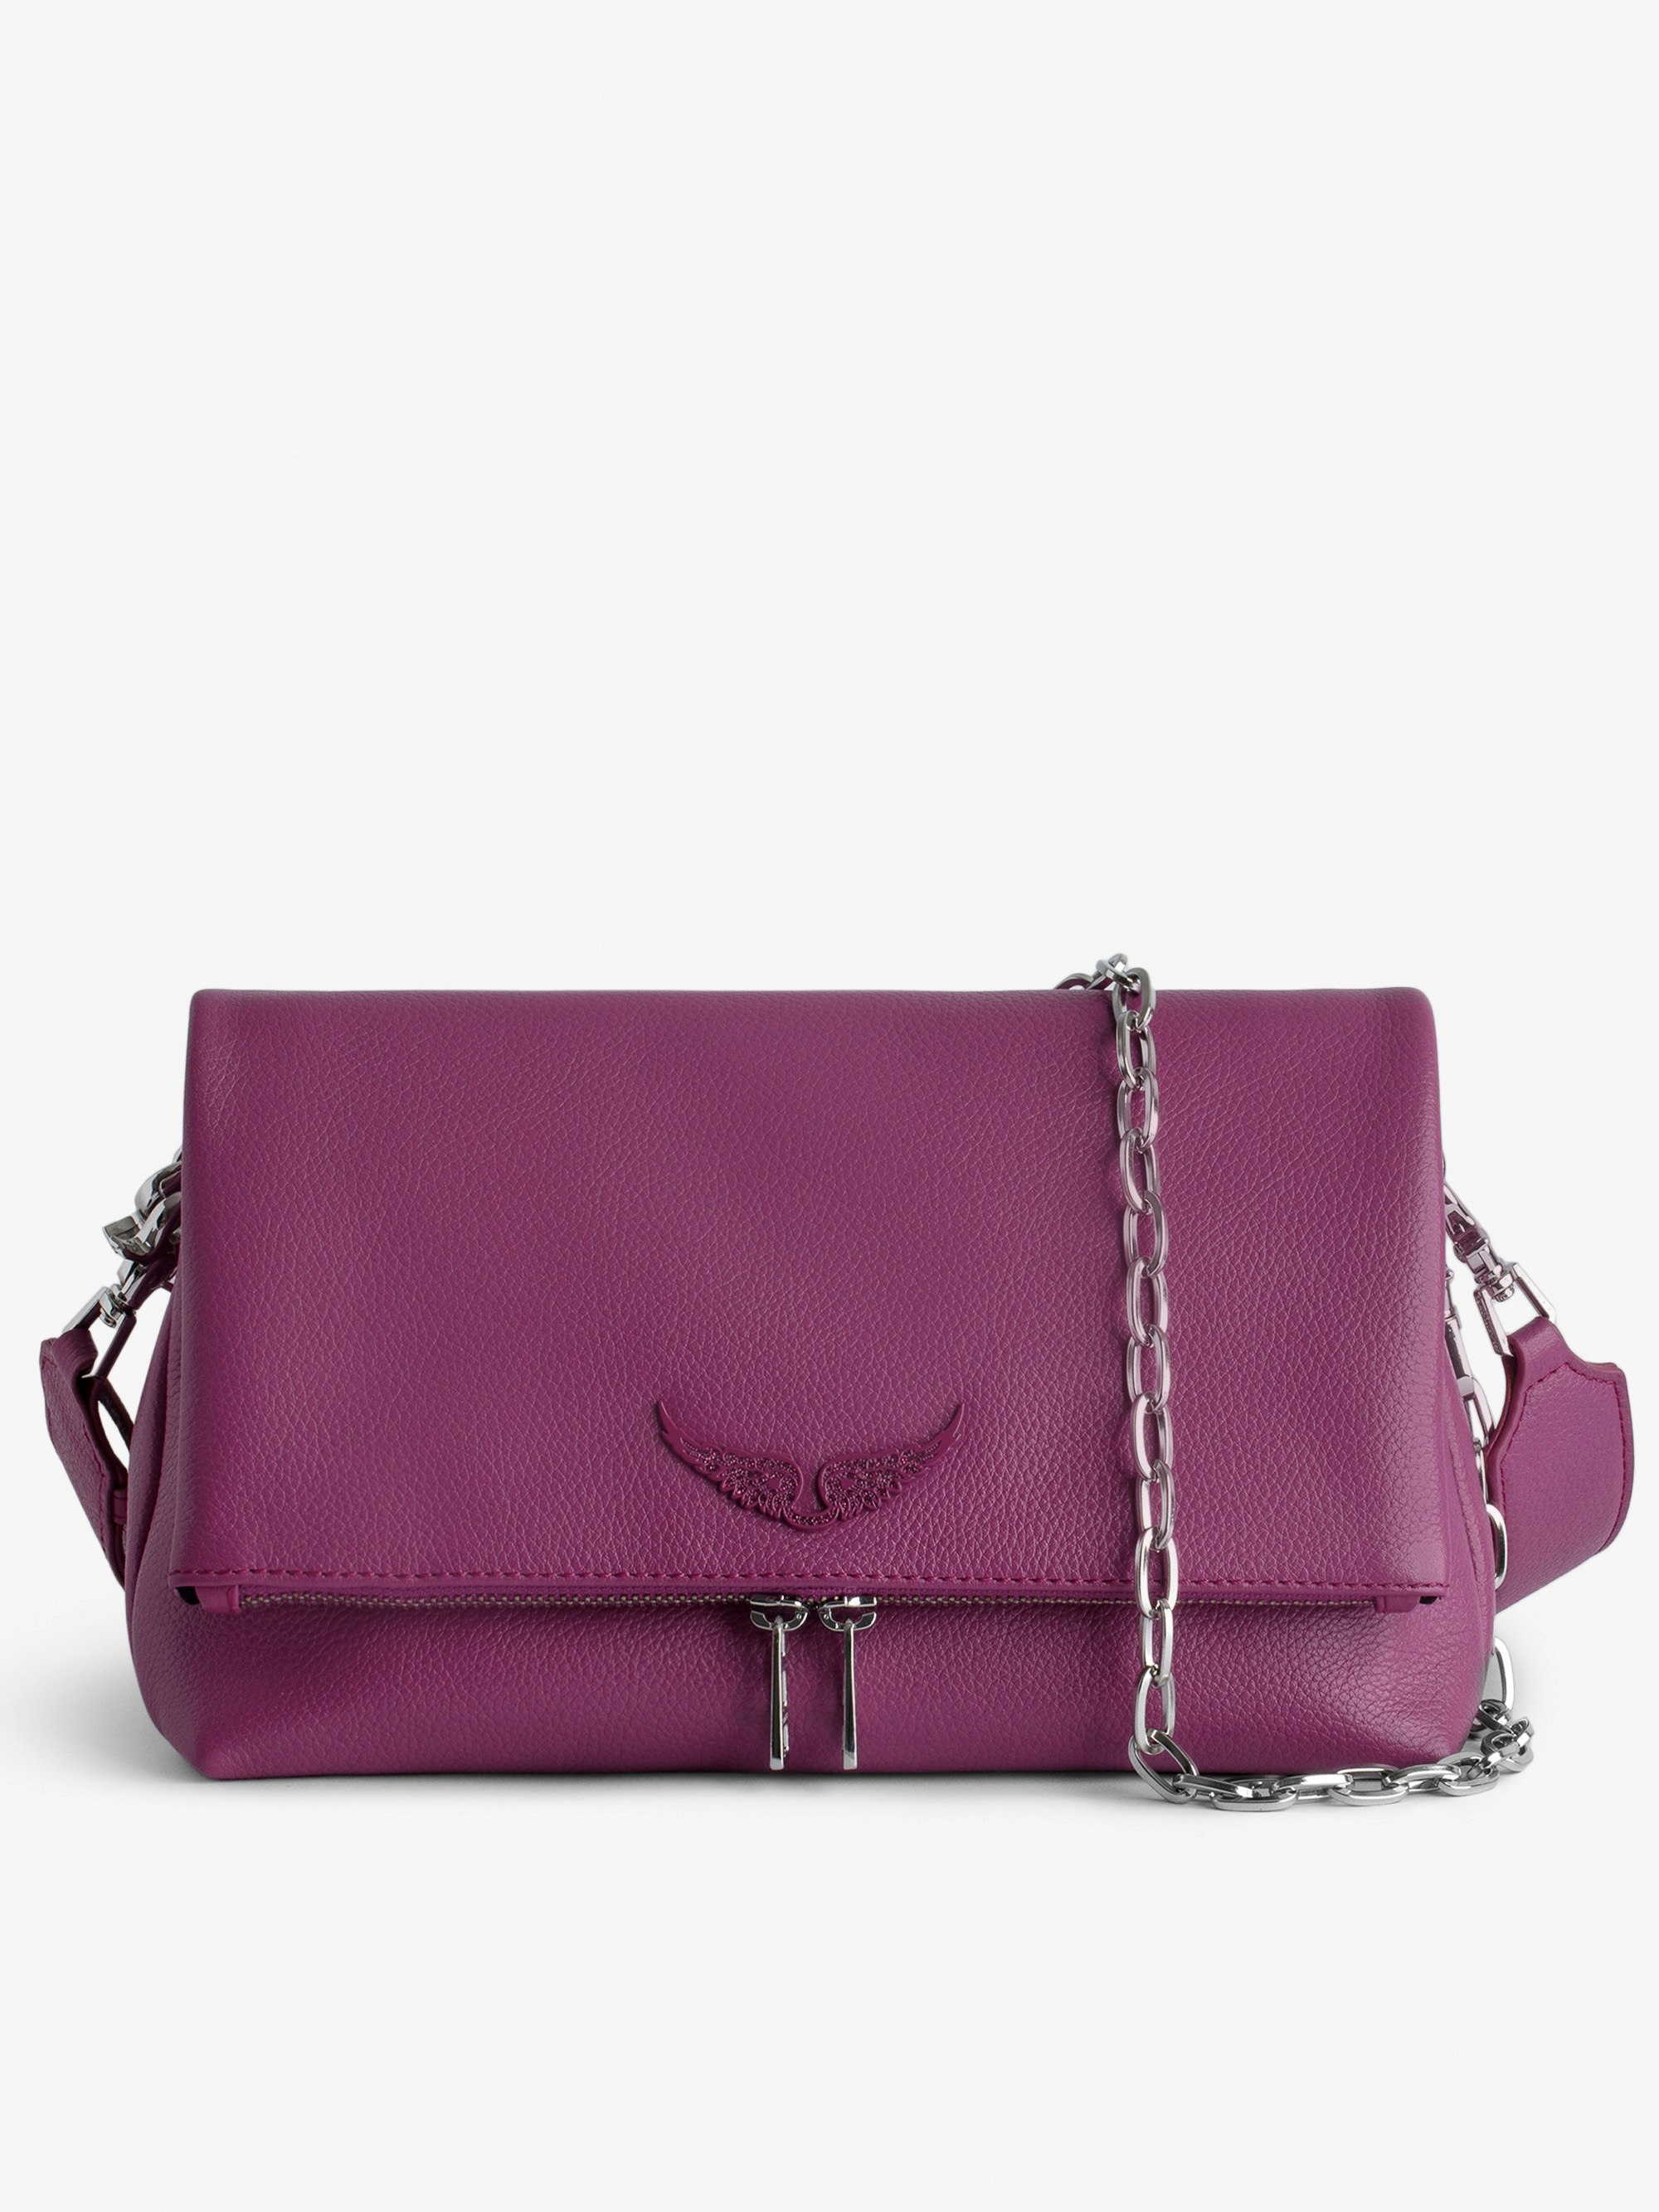 Rocky Bag - Fuchsia grained leather bag with leather and chain shoulder straps.